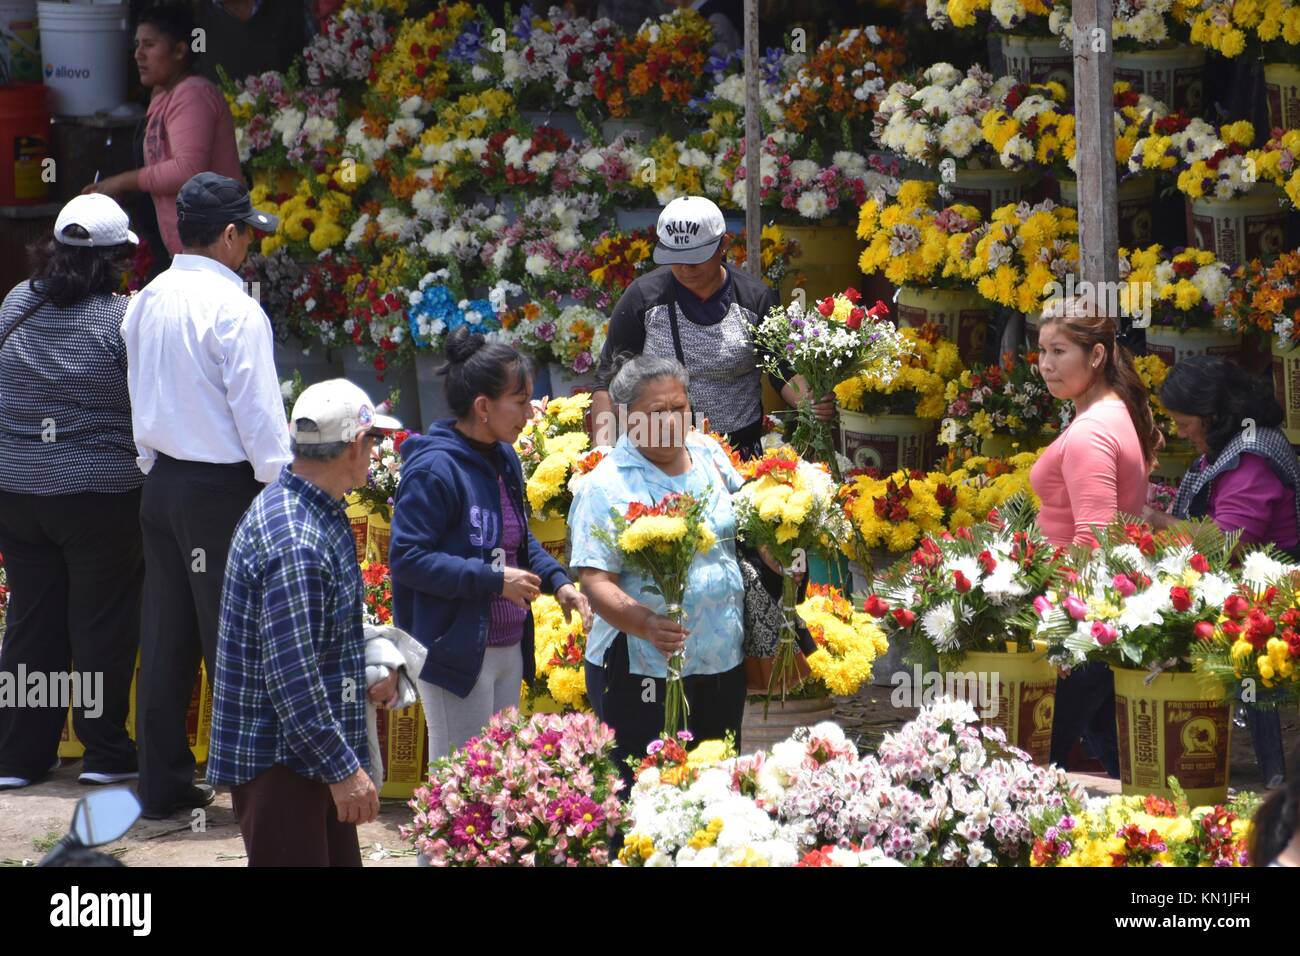 Lima, Peru - November 2nd, 2017: Flowers on sale near the Parque del Recuerdo cemetery ahead of the Day of the Dead holidays. Lima, Peru Stock Photo